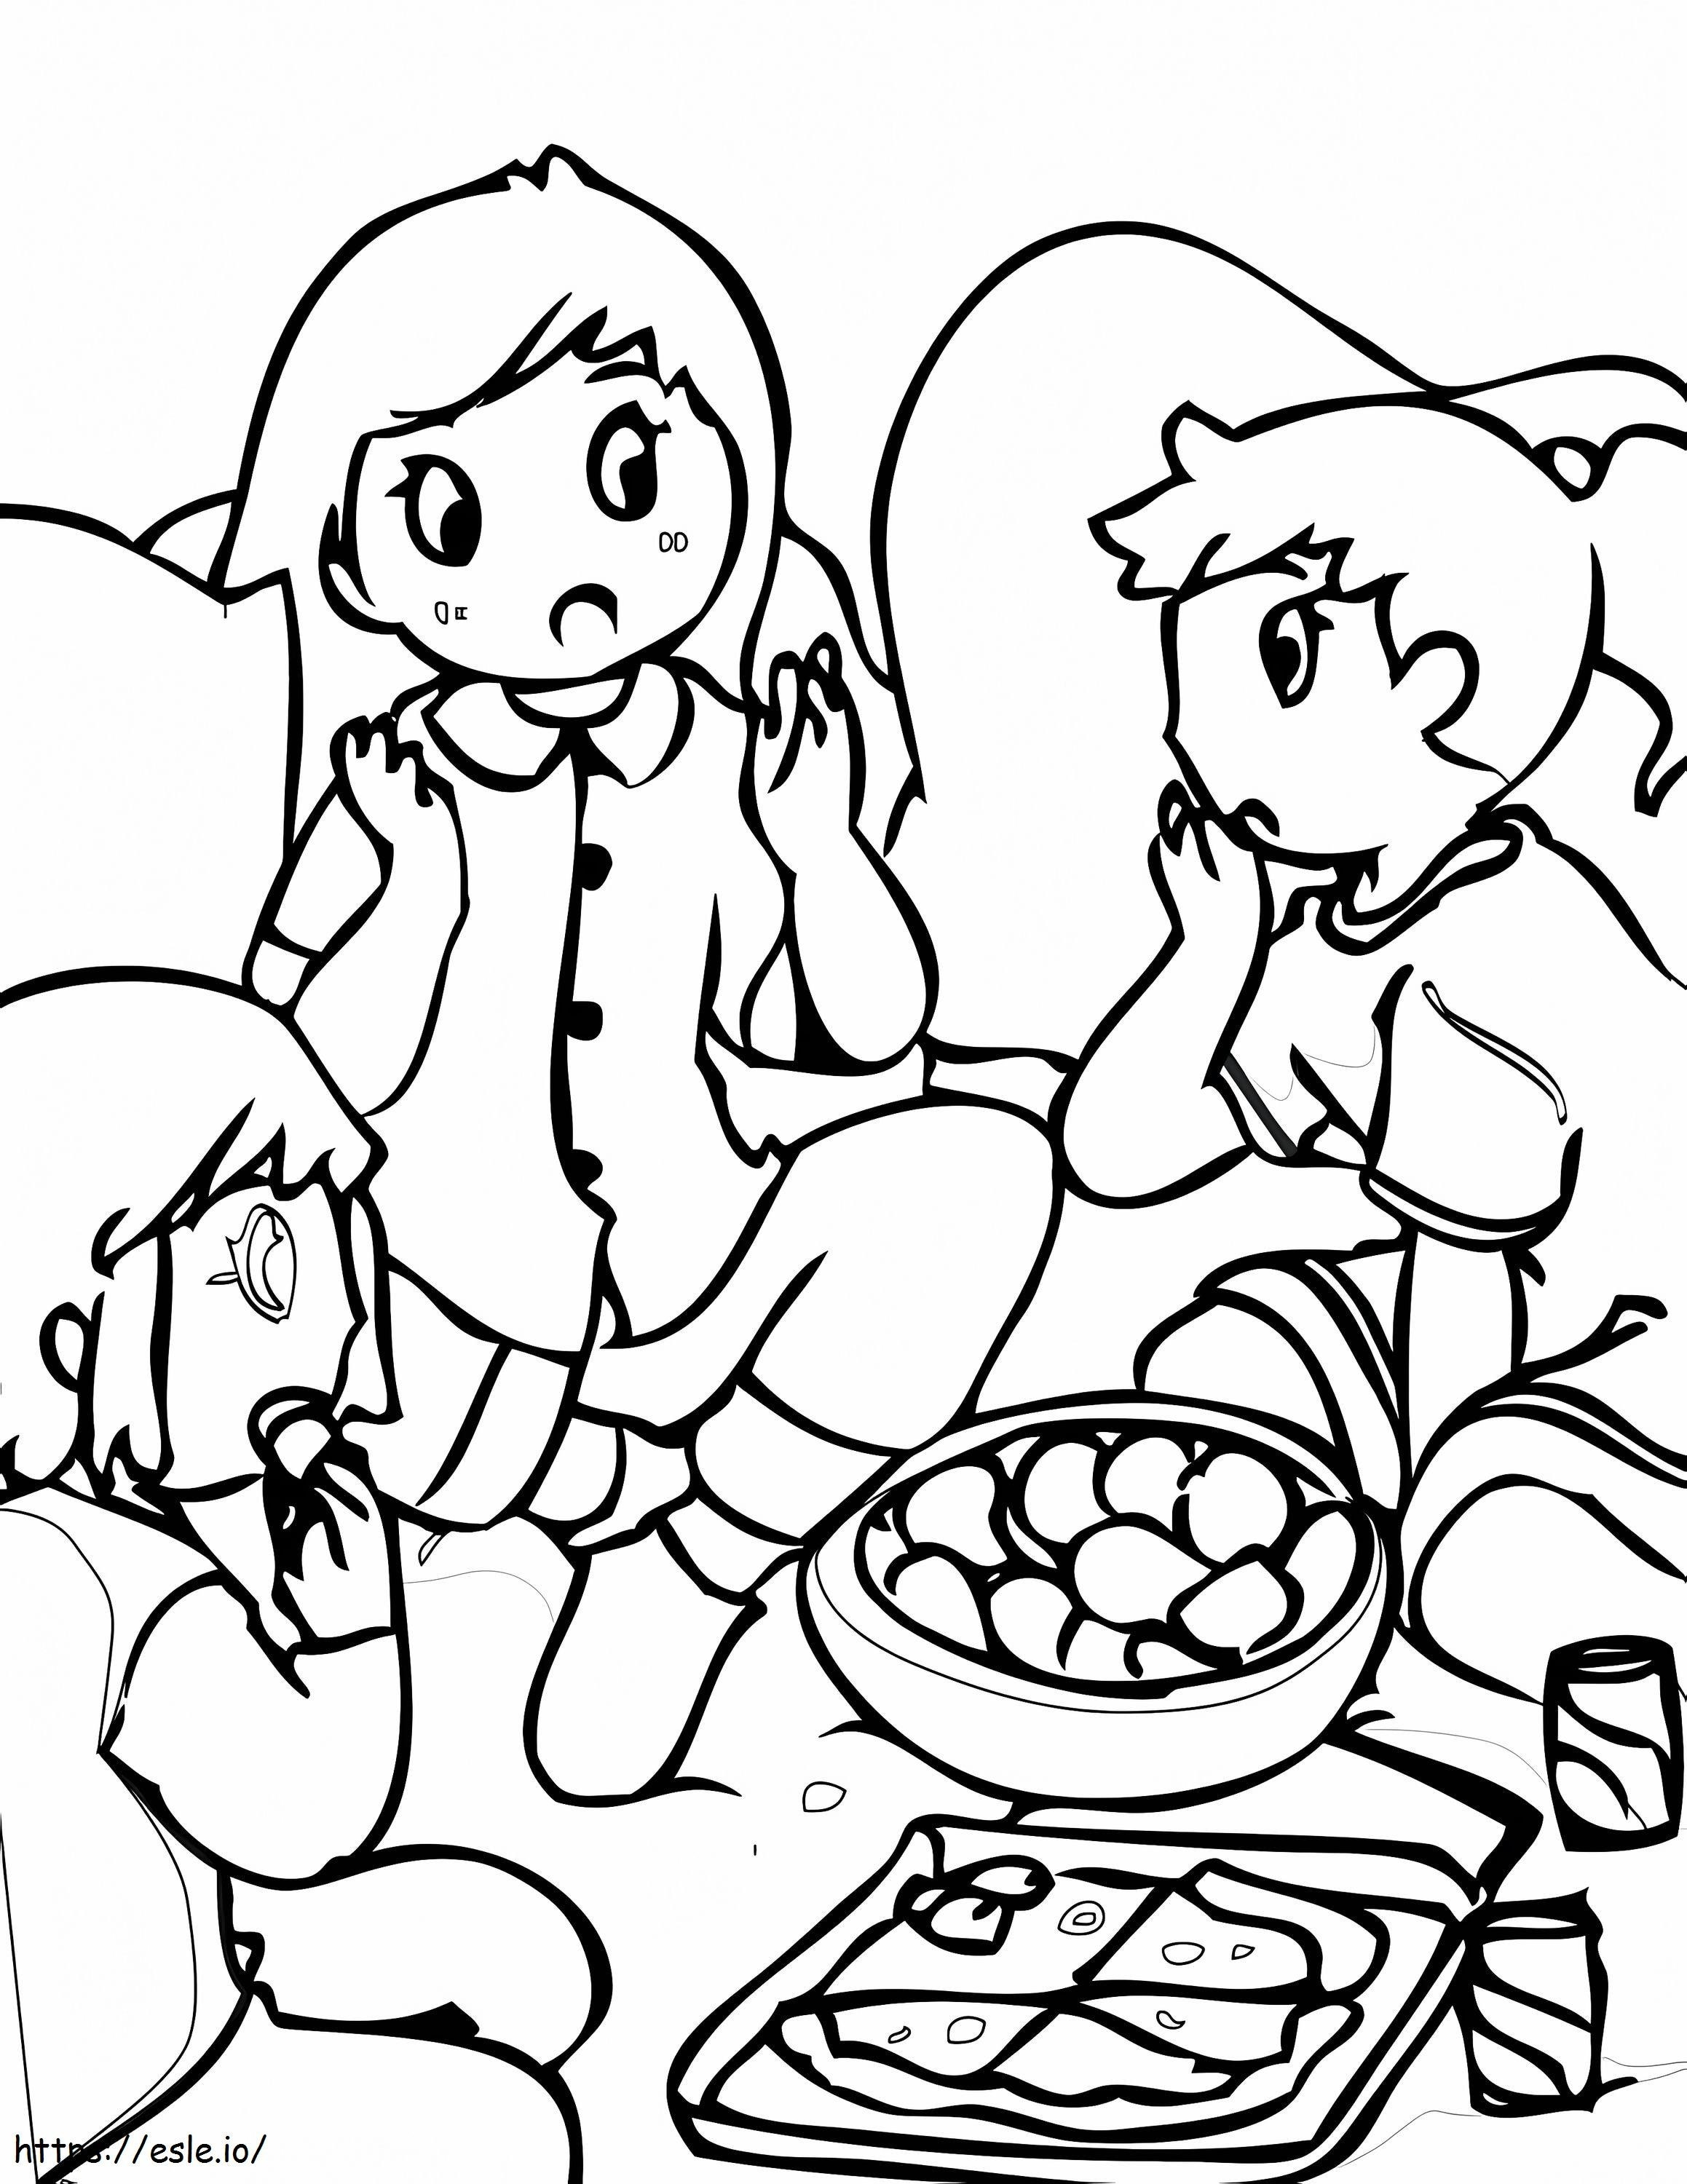 Sleepover coloring page